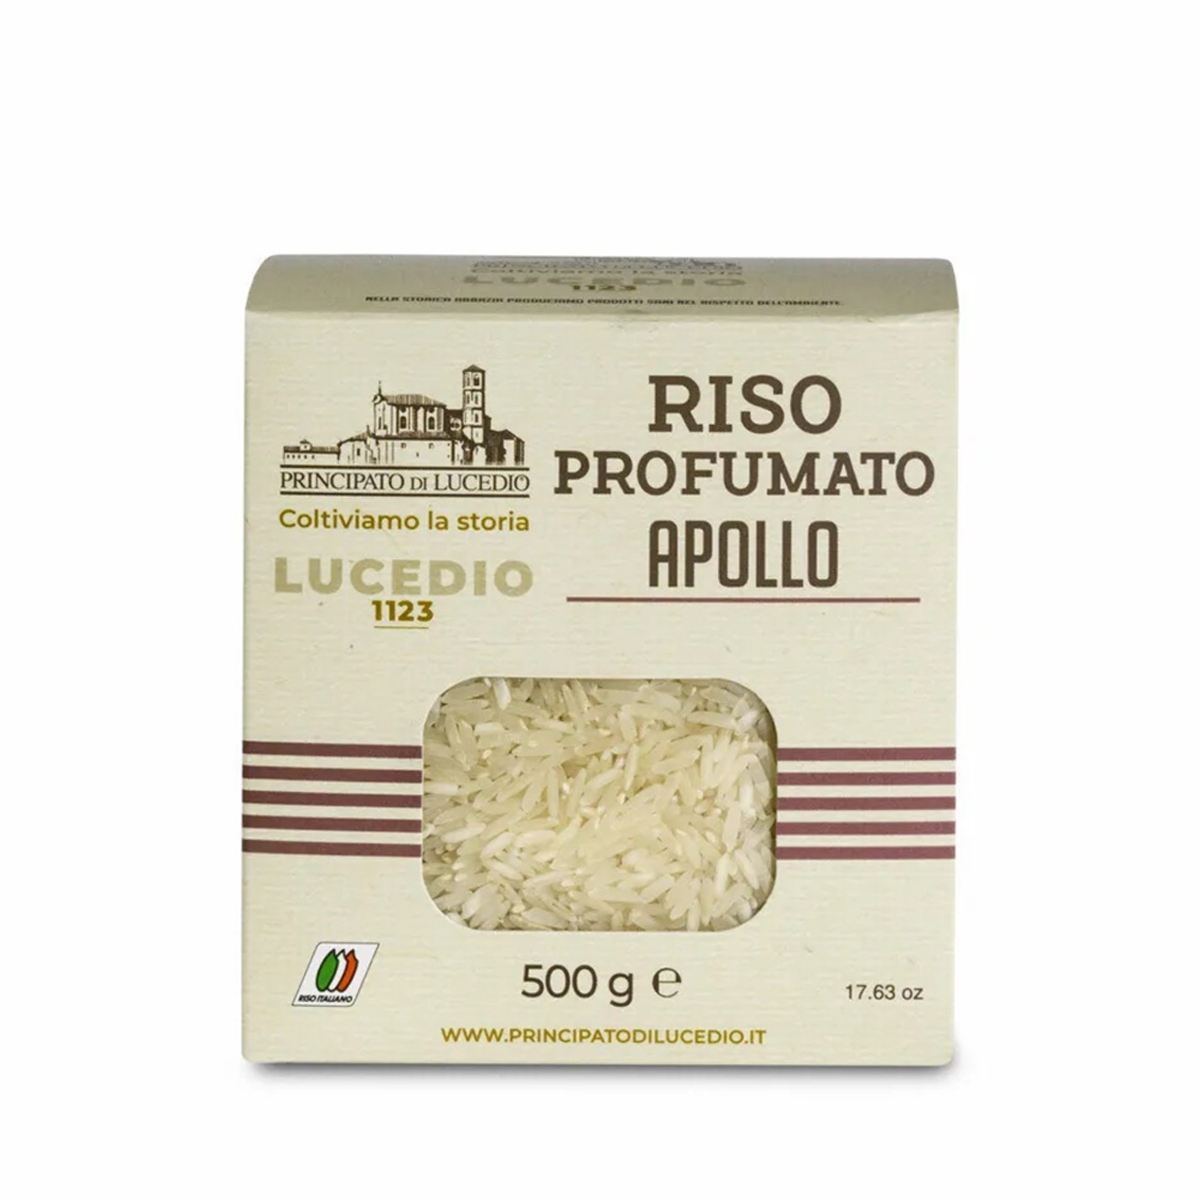 Apollo Scented Rice - 500 g - Packaged in Protective Atmosphere and Cardboard Box